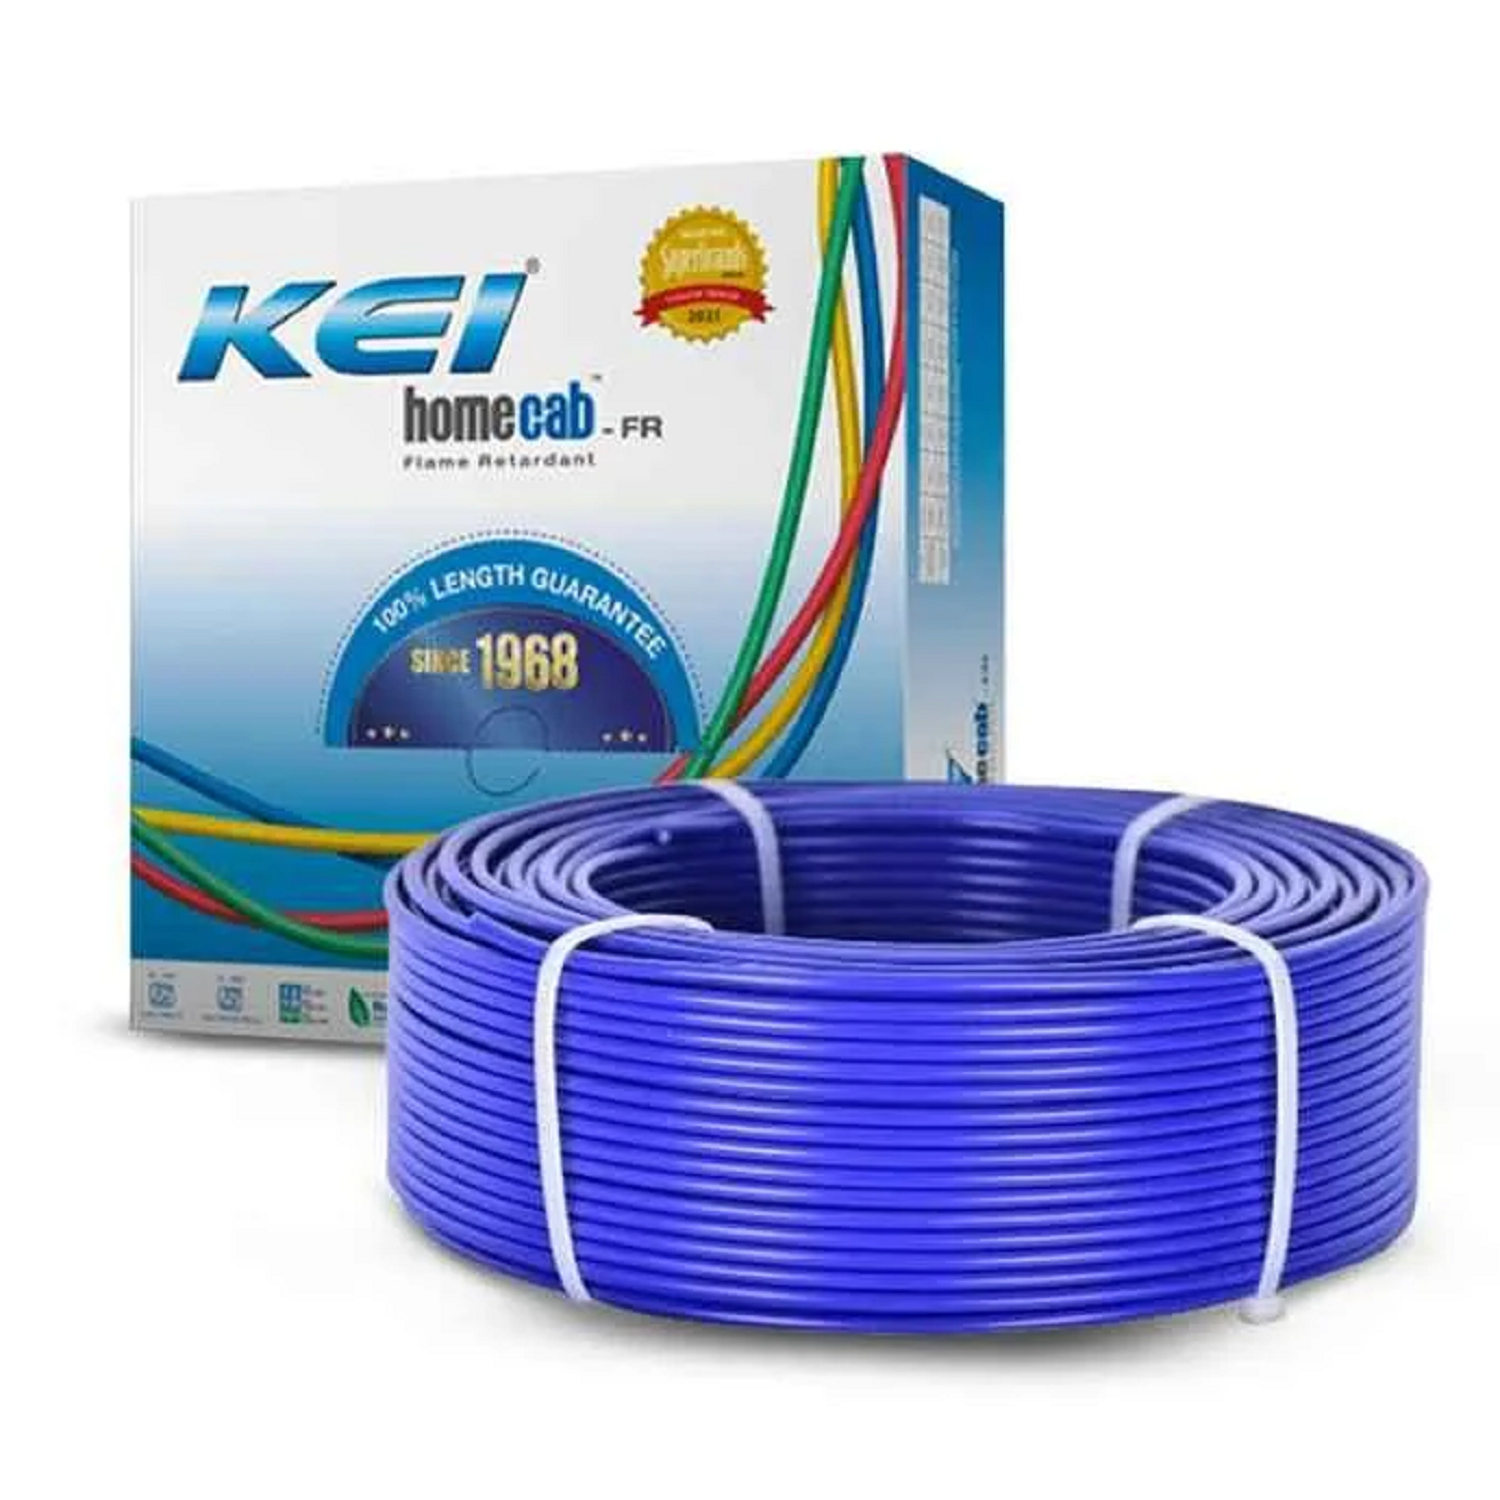 4.0 Sqmm KEI FR Single Core Copper Wire (90 Mtr) With PVC Insulated for House 38 Industrial Uses (Bl